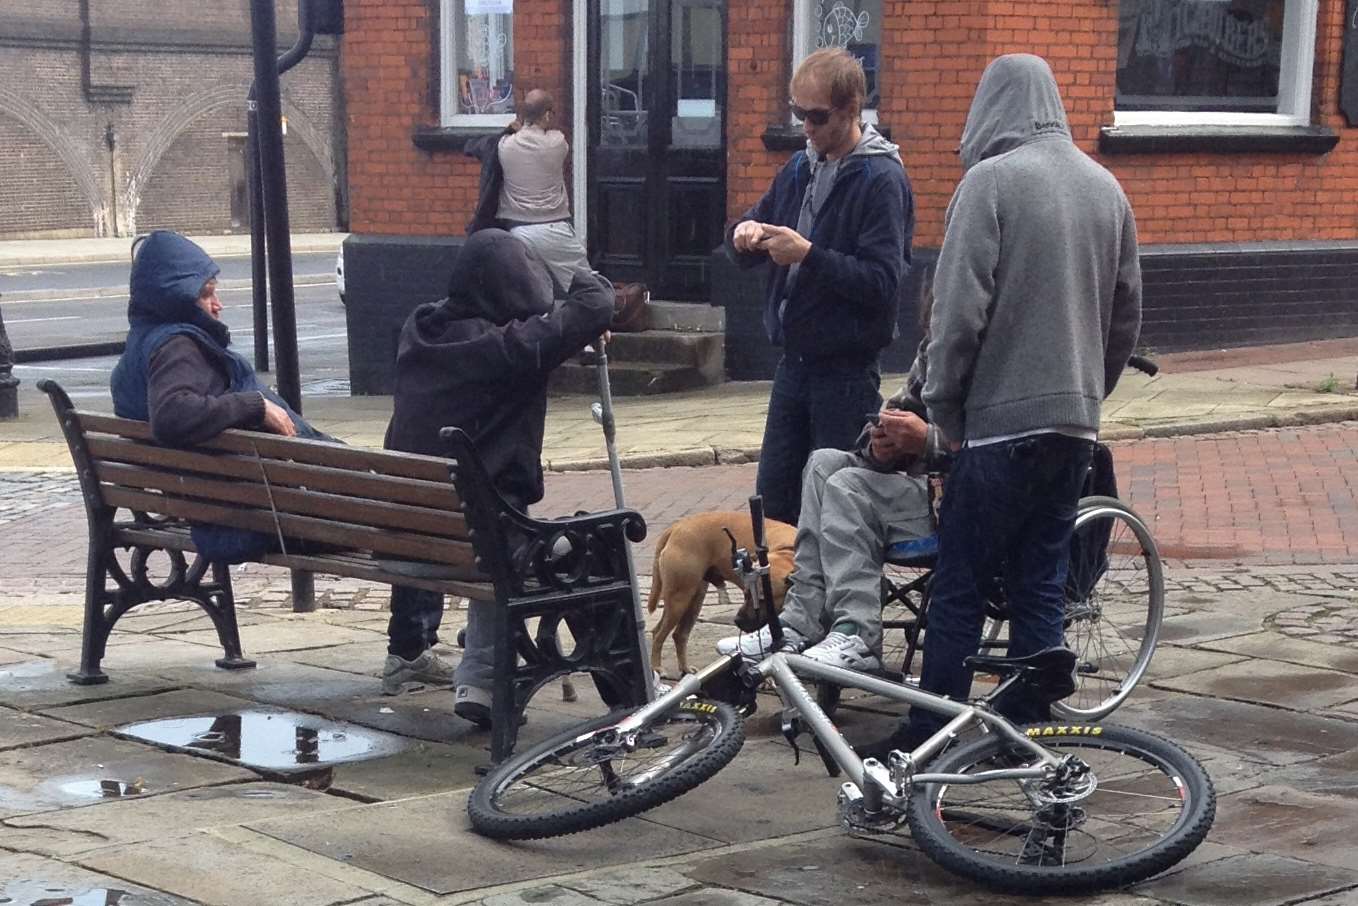 Rochester High Street is a magnet for street drinkers, vagrants and beggars